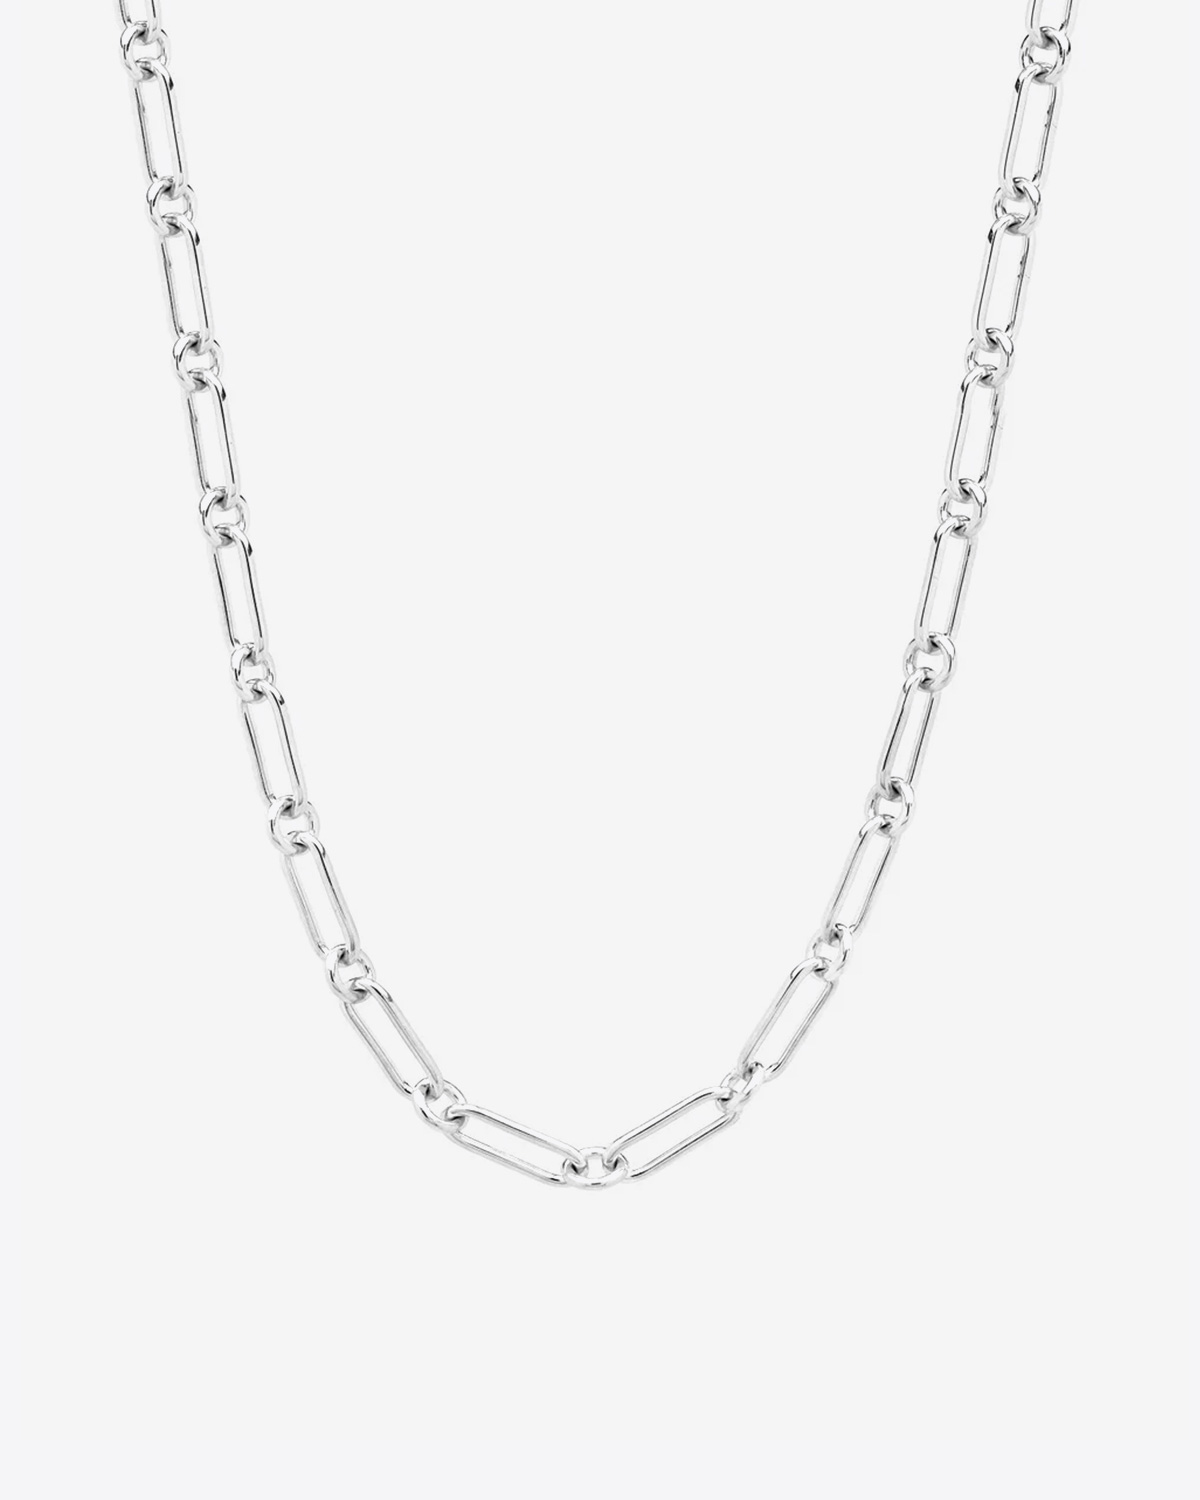 Collier Box Chain Large 52 cm Silver Tom Wood Project. 